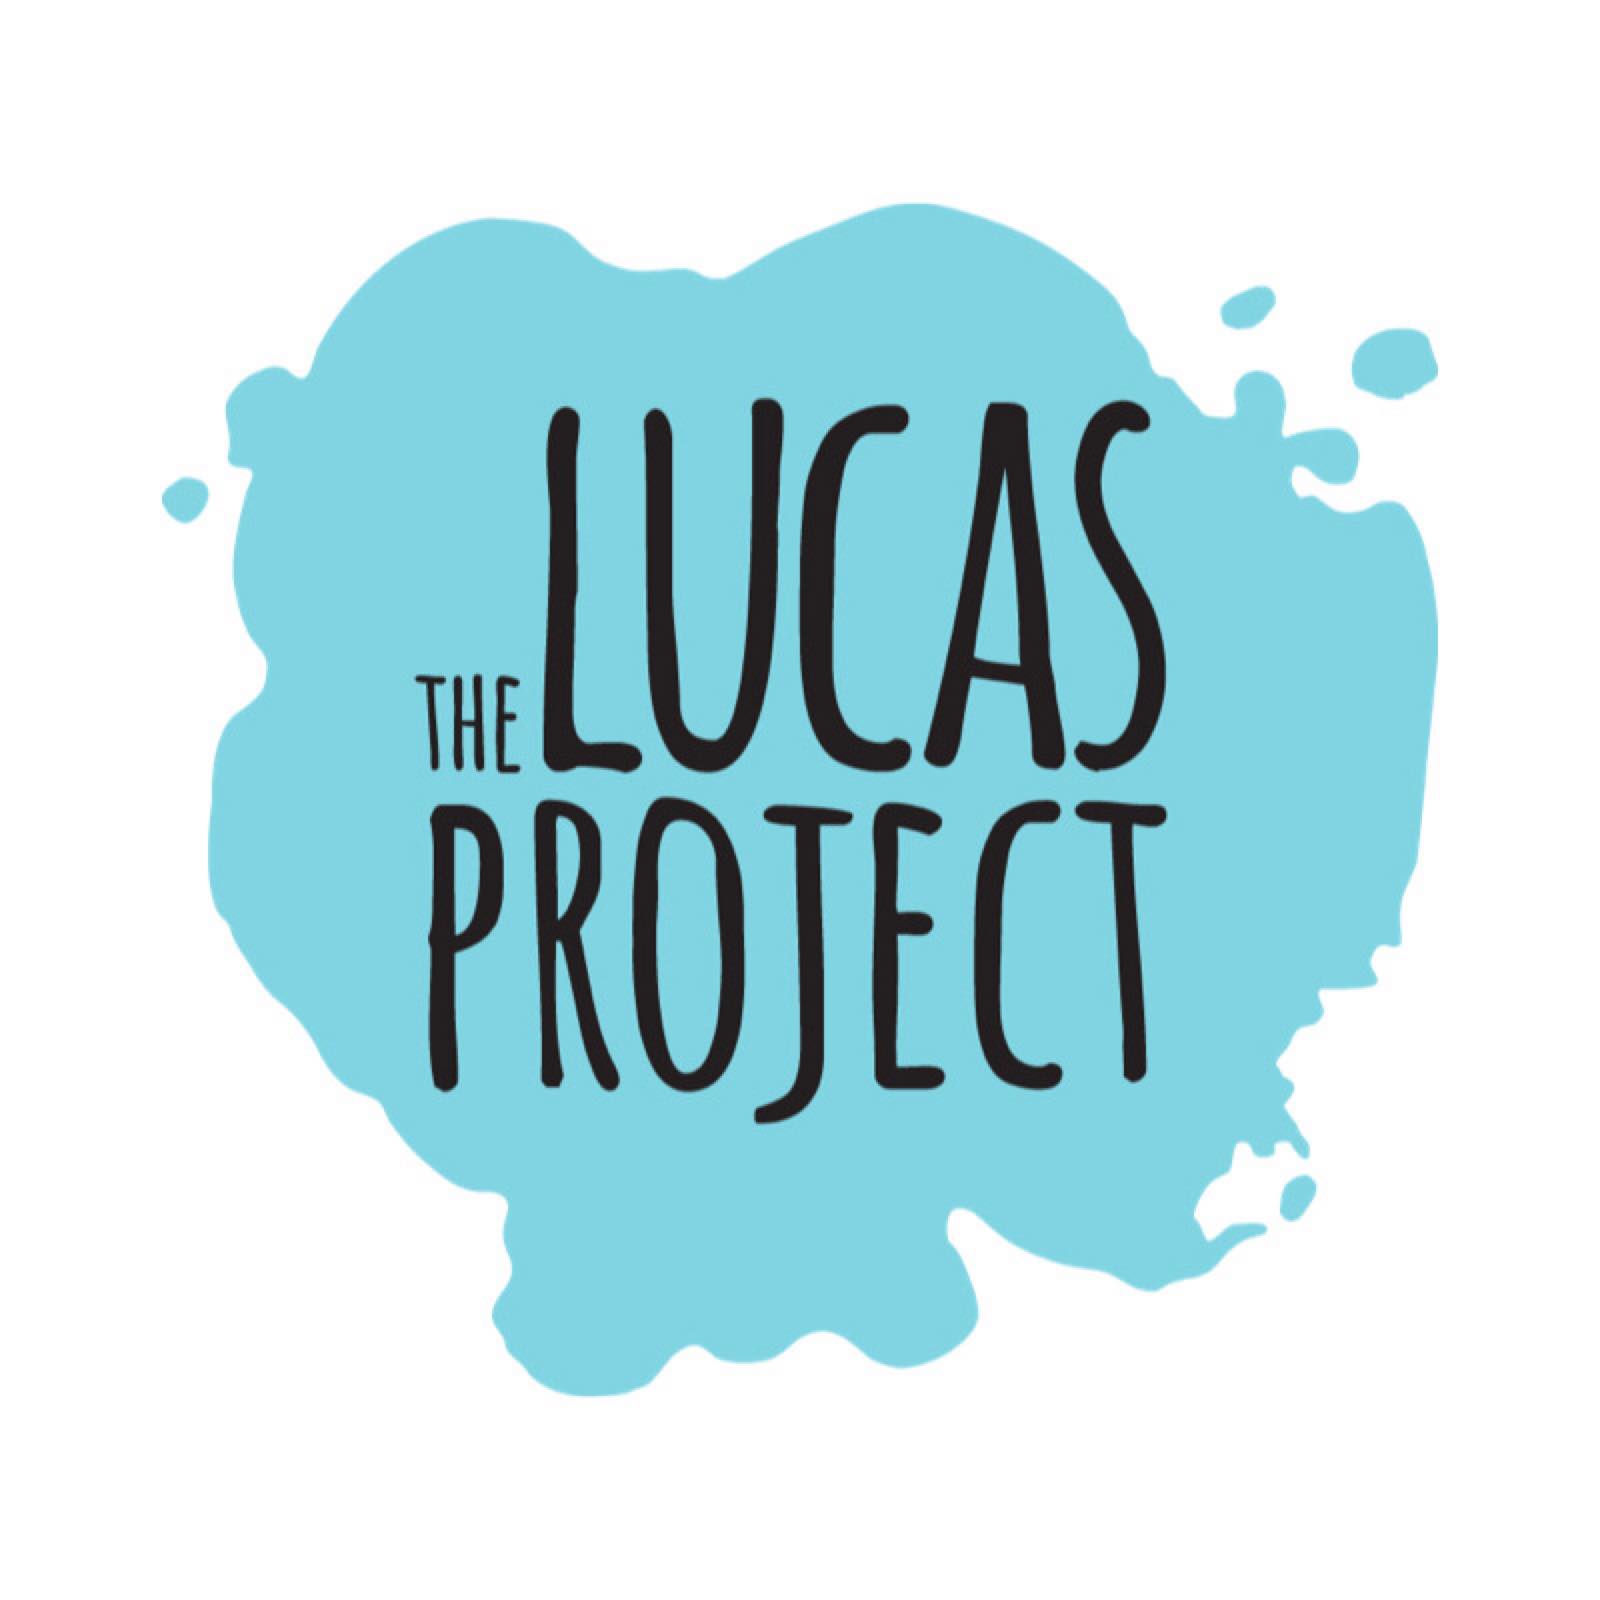 The Lucas Project logo